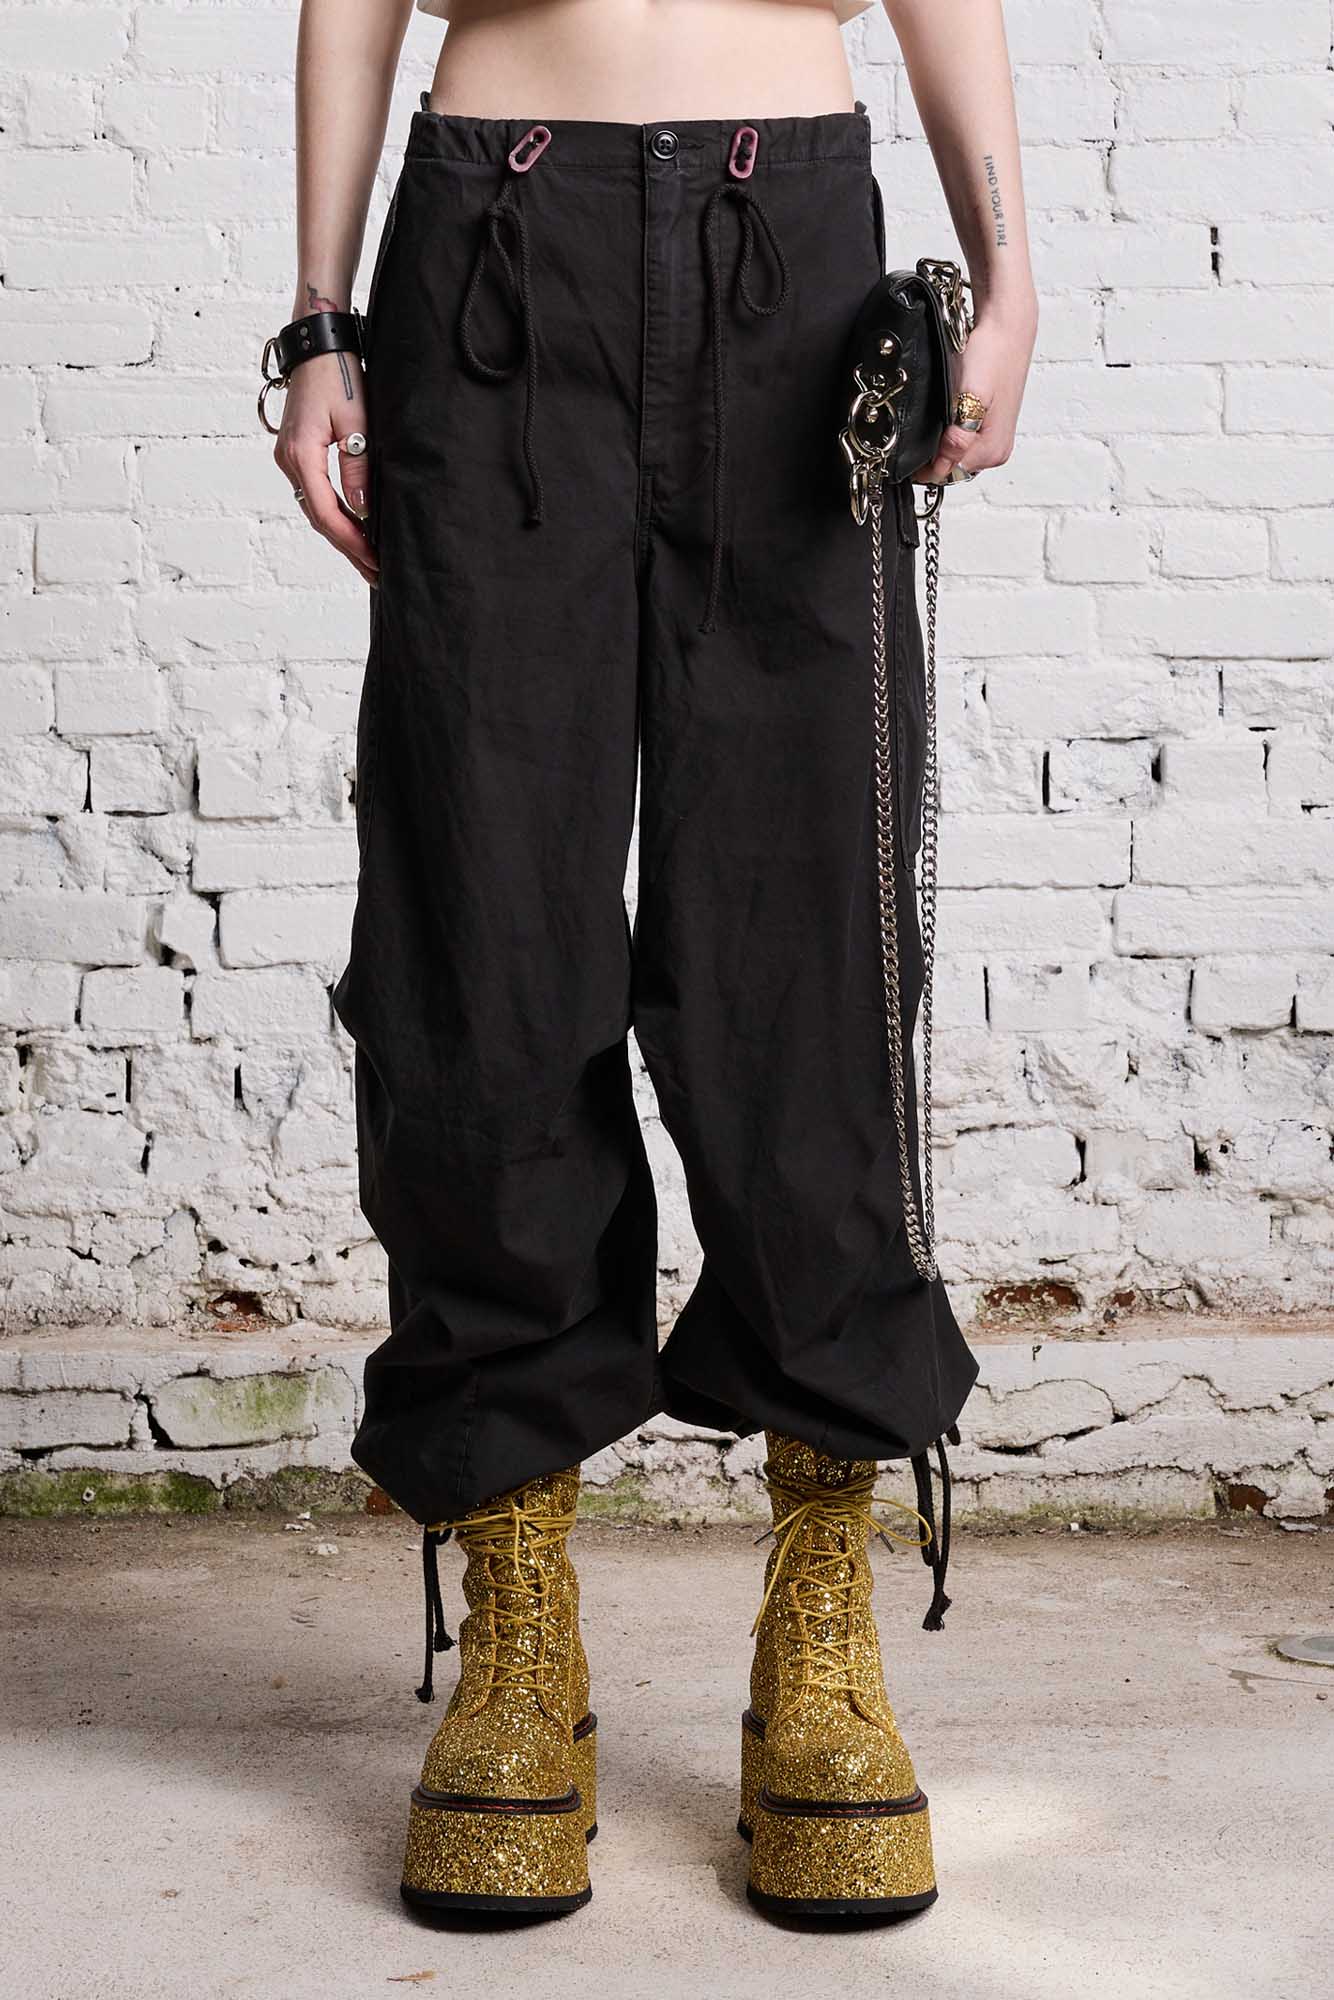 R13 Balloon Army Pants in Washed Black XS